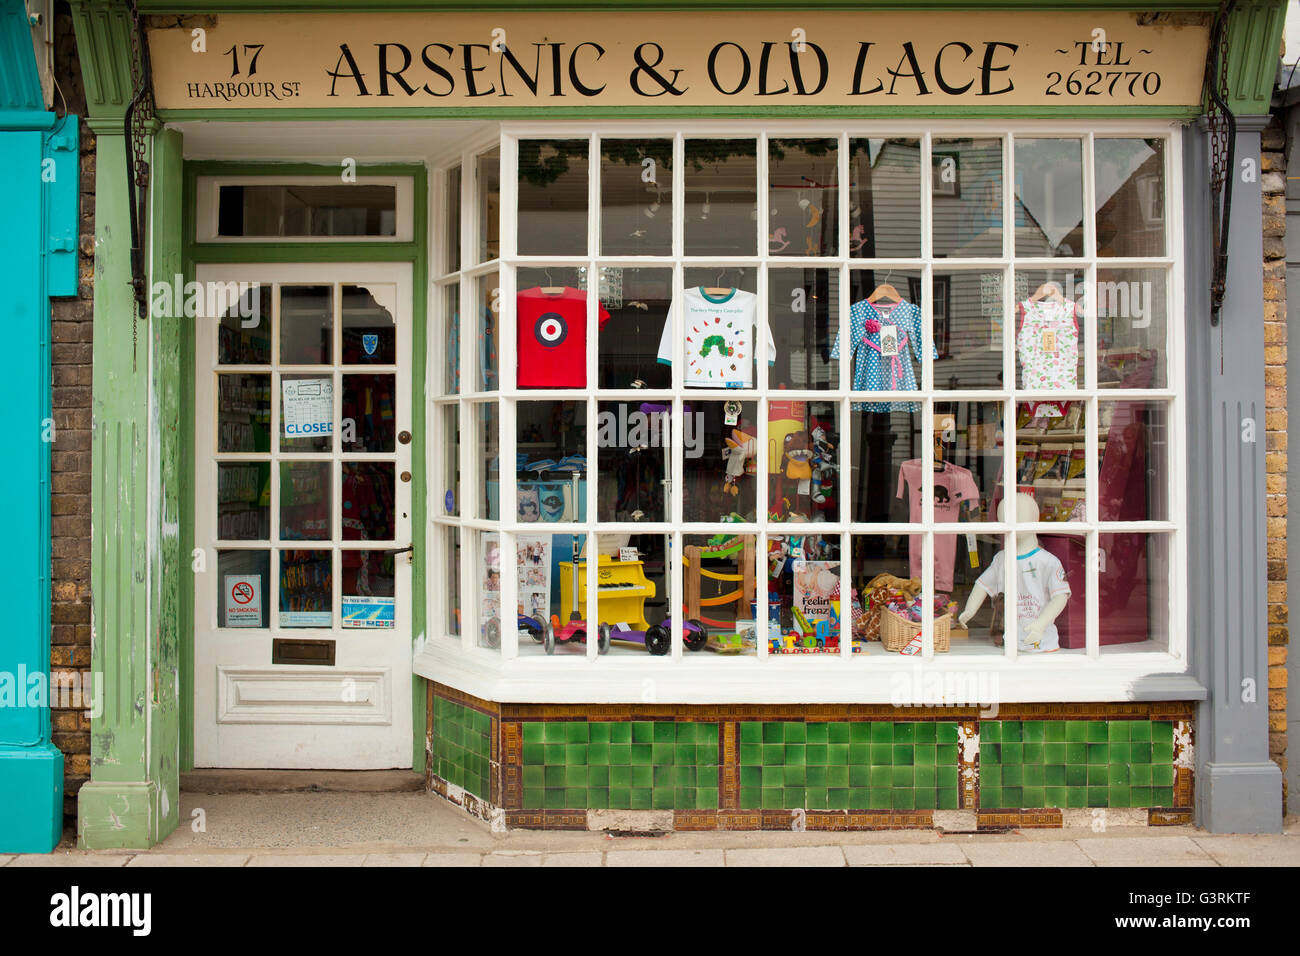 Arsenic and Old Lace independent retail shop in Harbour Street, Whitstable, Kent Stock Photo